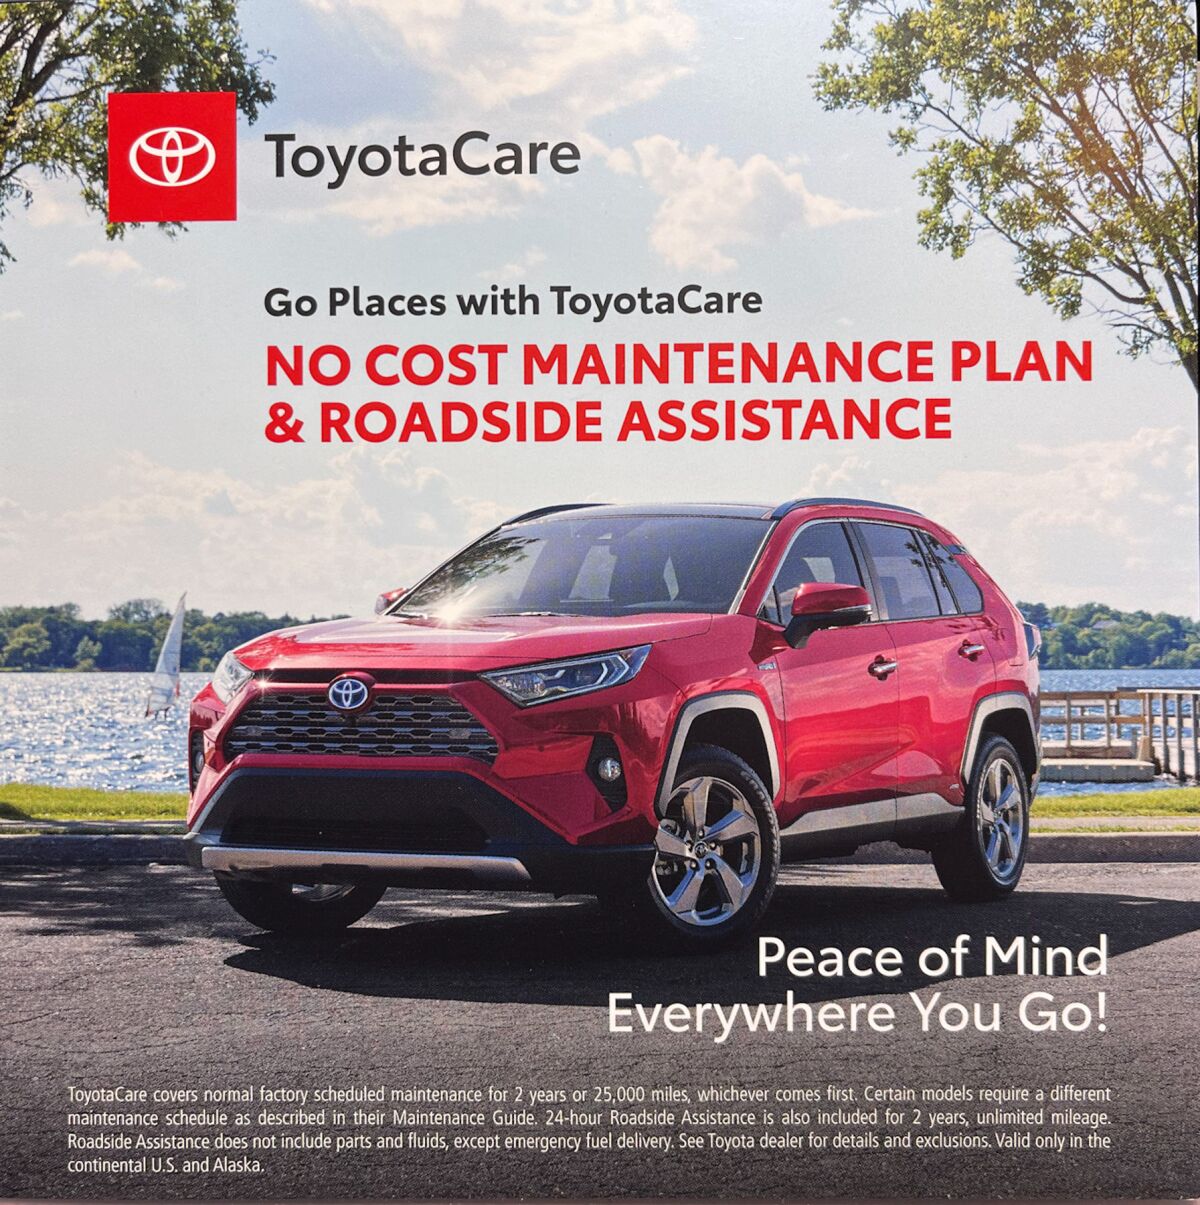 ToyotaCare no cost plan